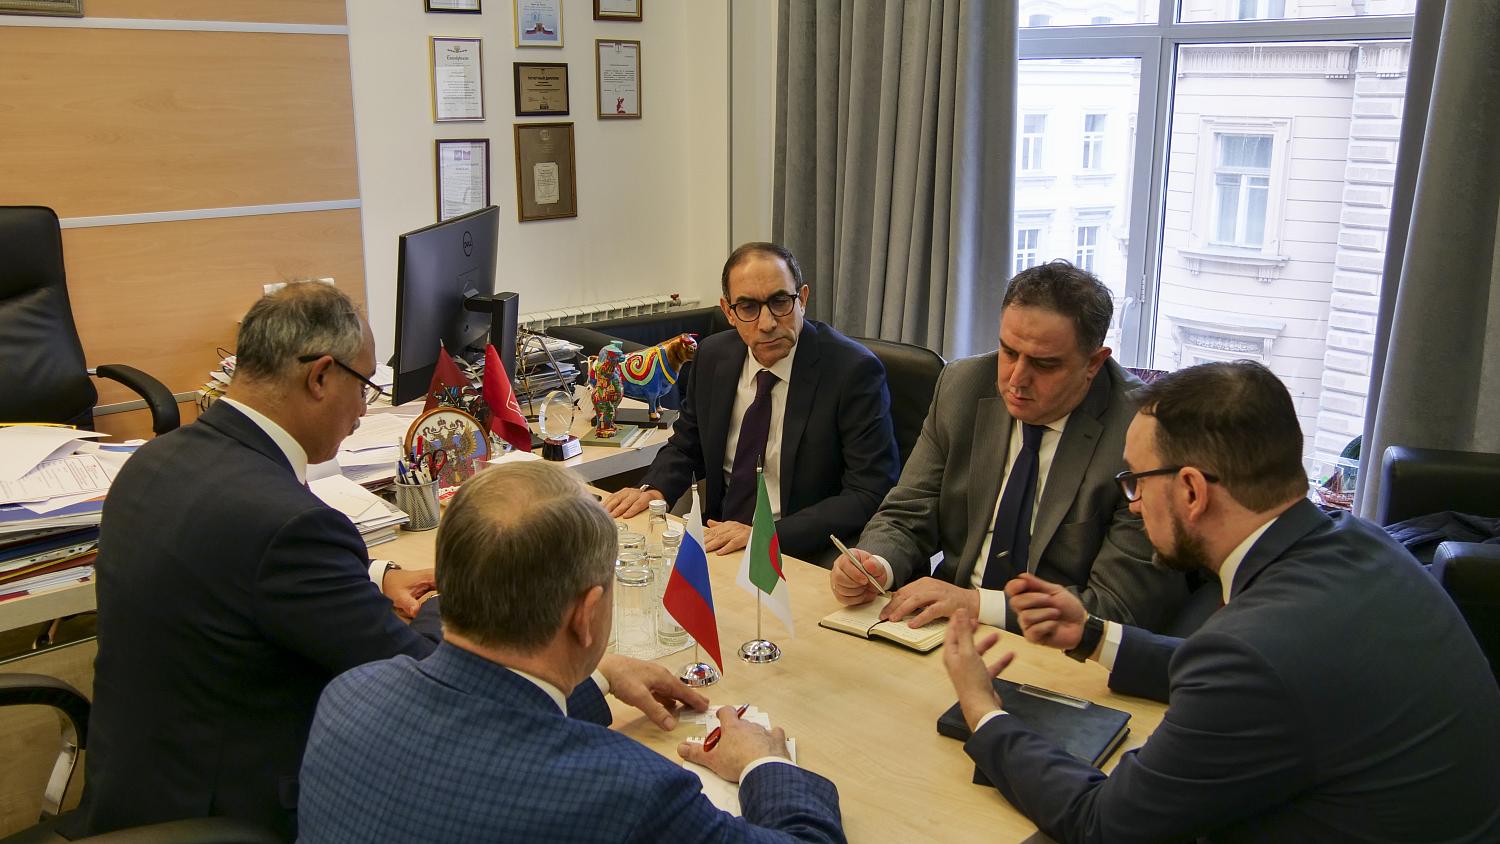 On February 18 in the Chamber of Commerce and Industry a round table on "Business cooperation between companies of the Russian Federation and the Algerian People's Democratic Republic" was held